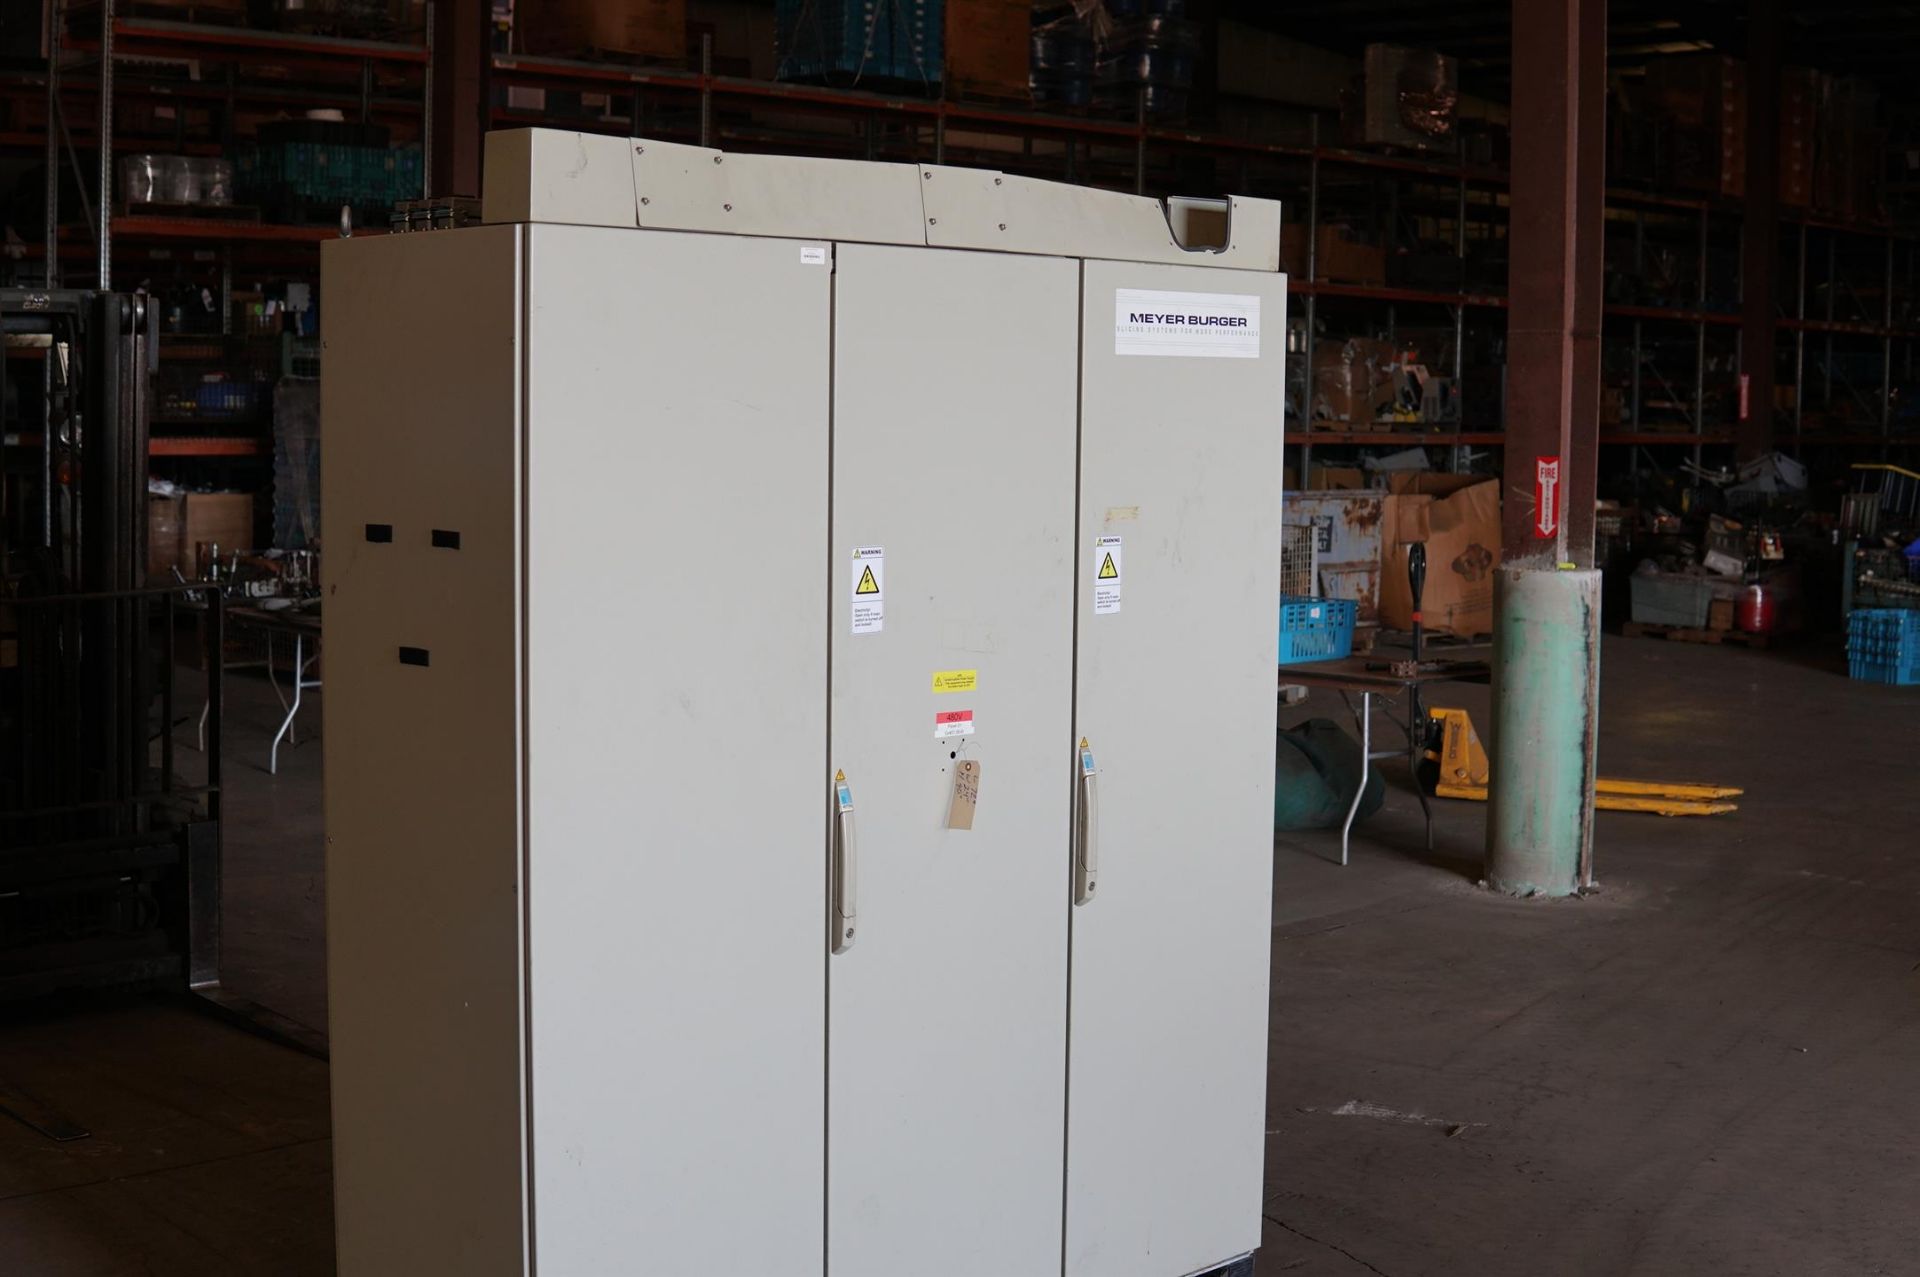 Large Ind Electrical Cab- (LOADING FEE - $50)